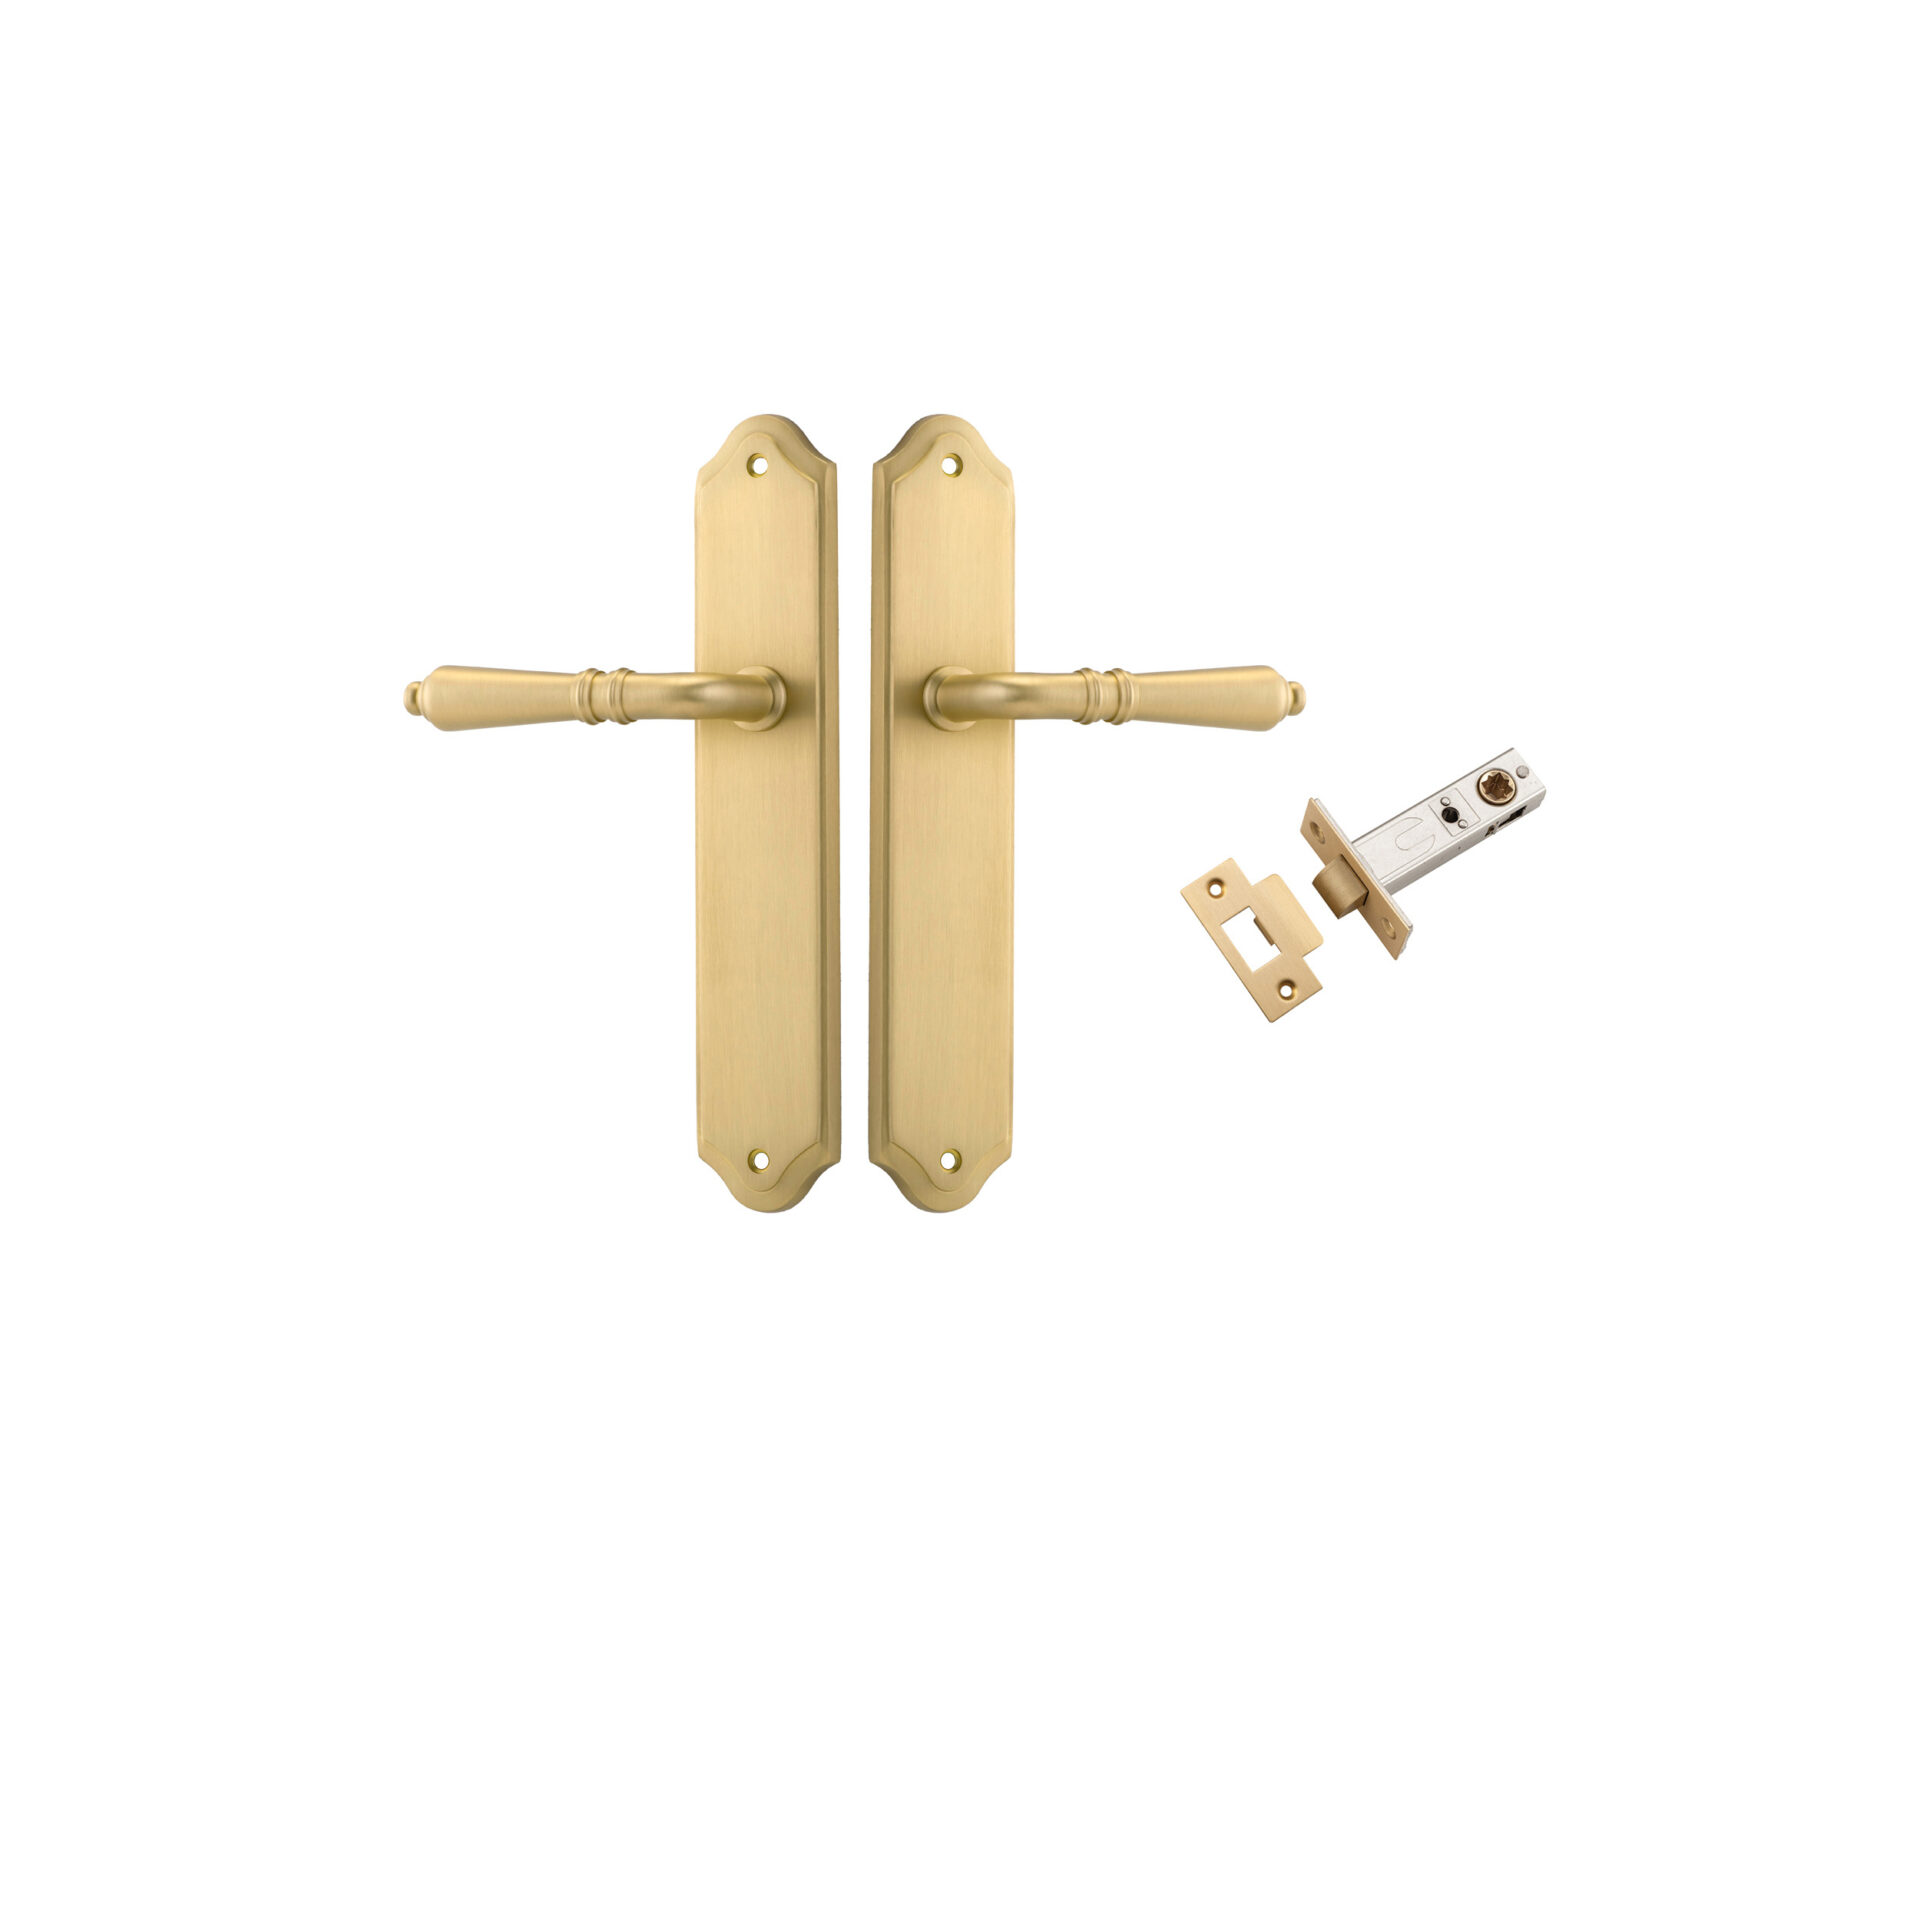 16212KPASS60 - Sarlat Lever - Shouldered Backplate Passage Kit - Brushed Gold PVD - Passage